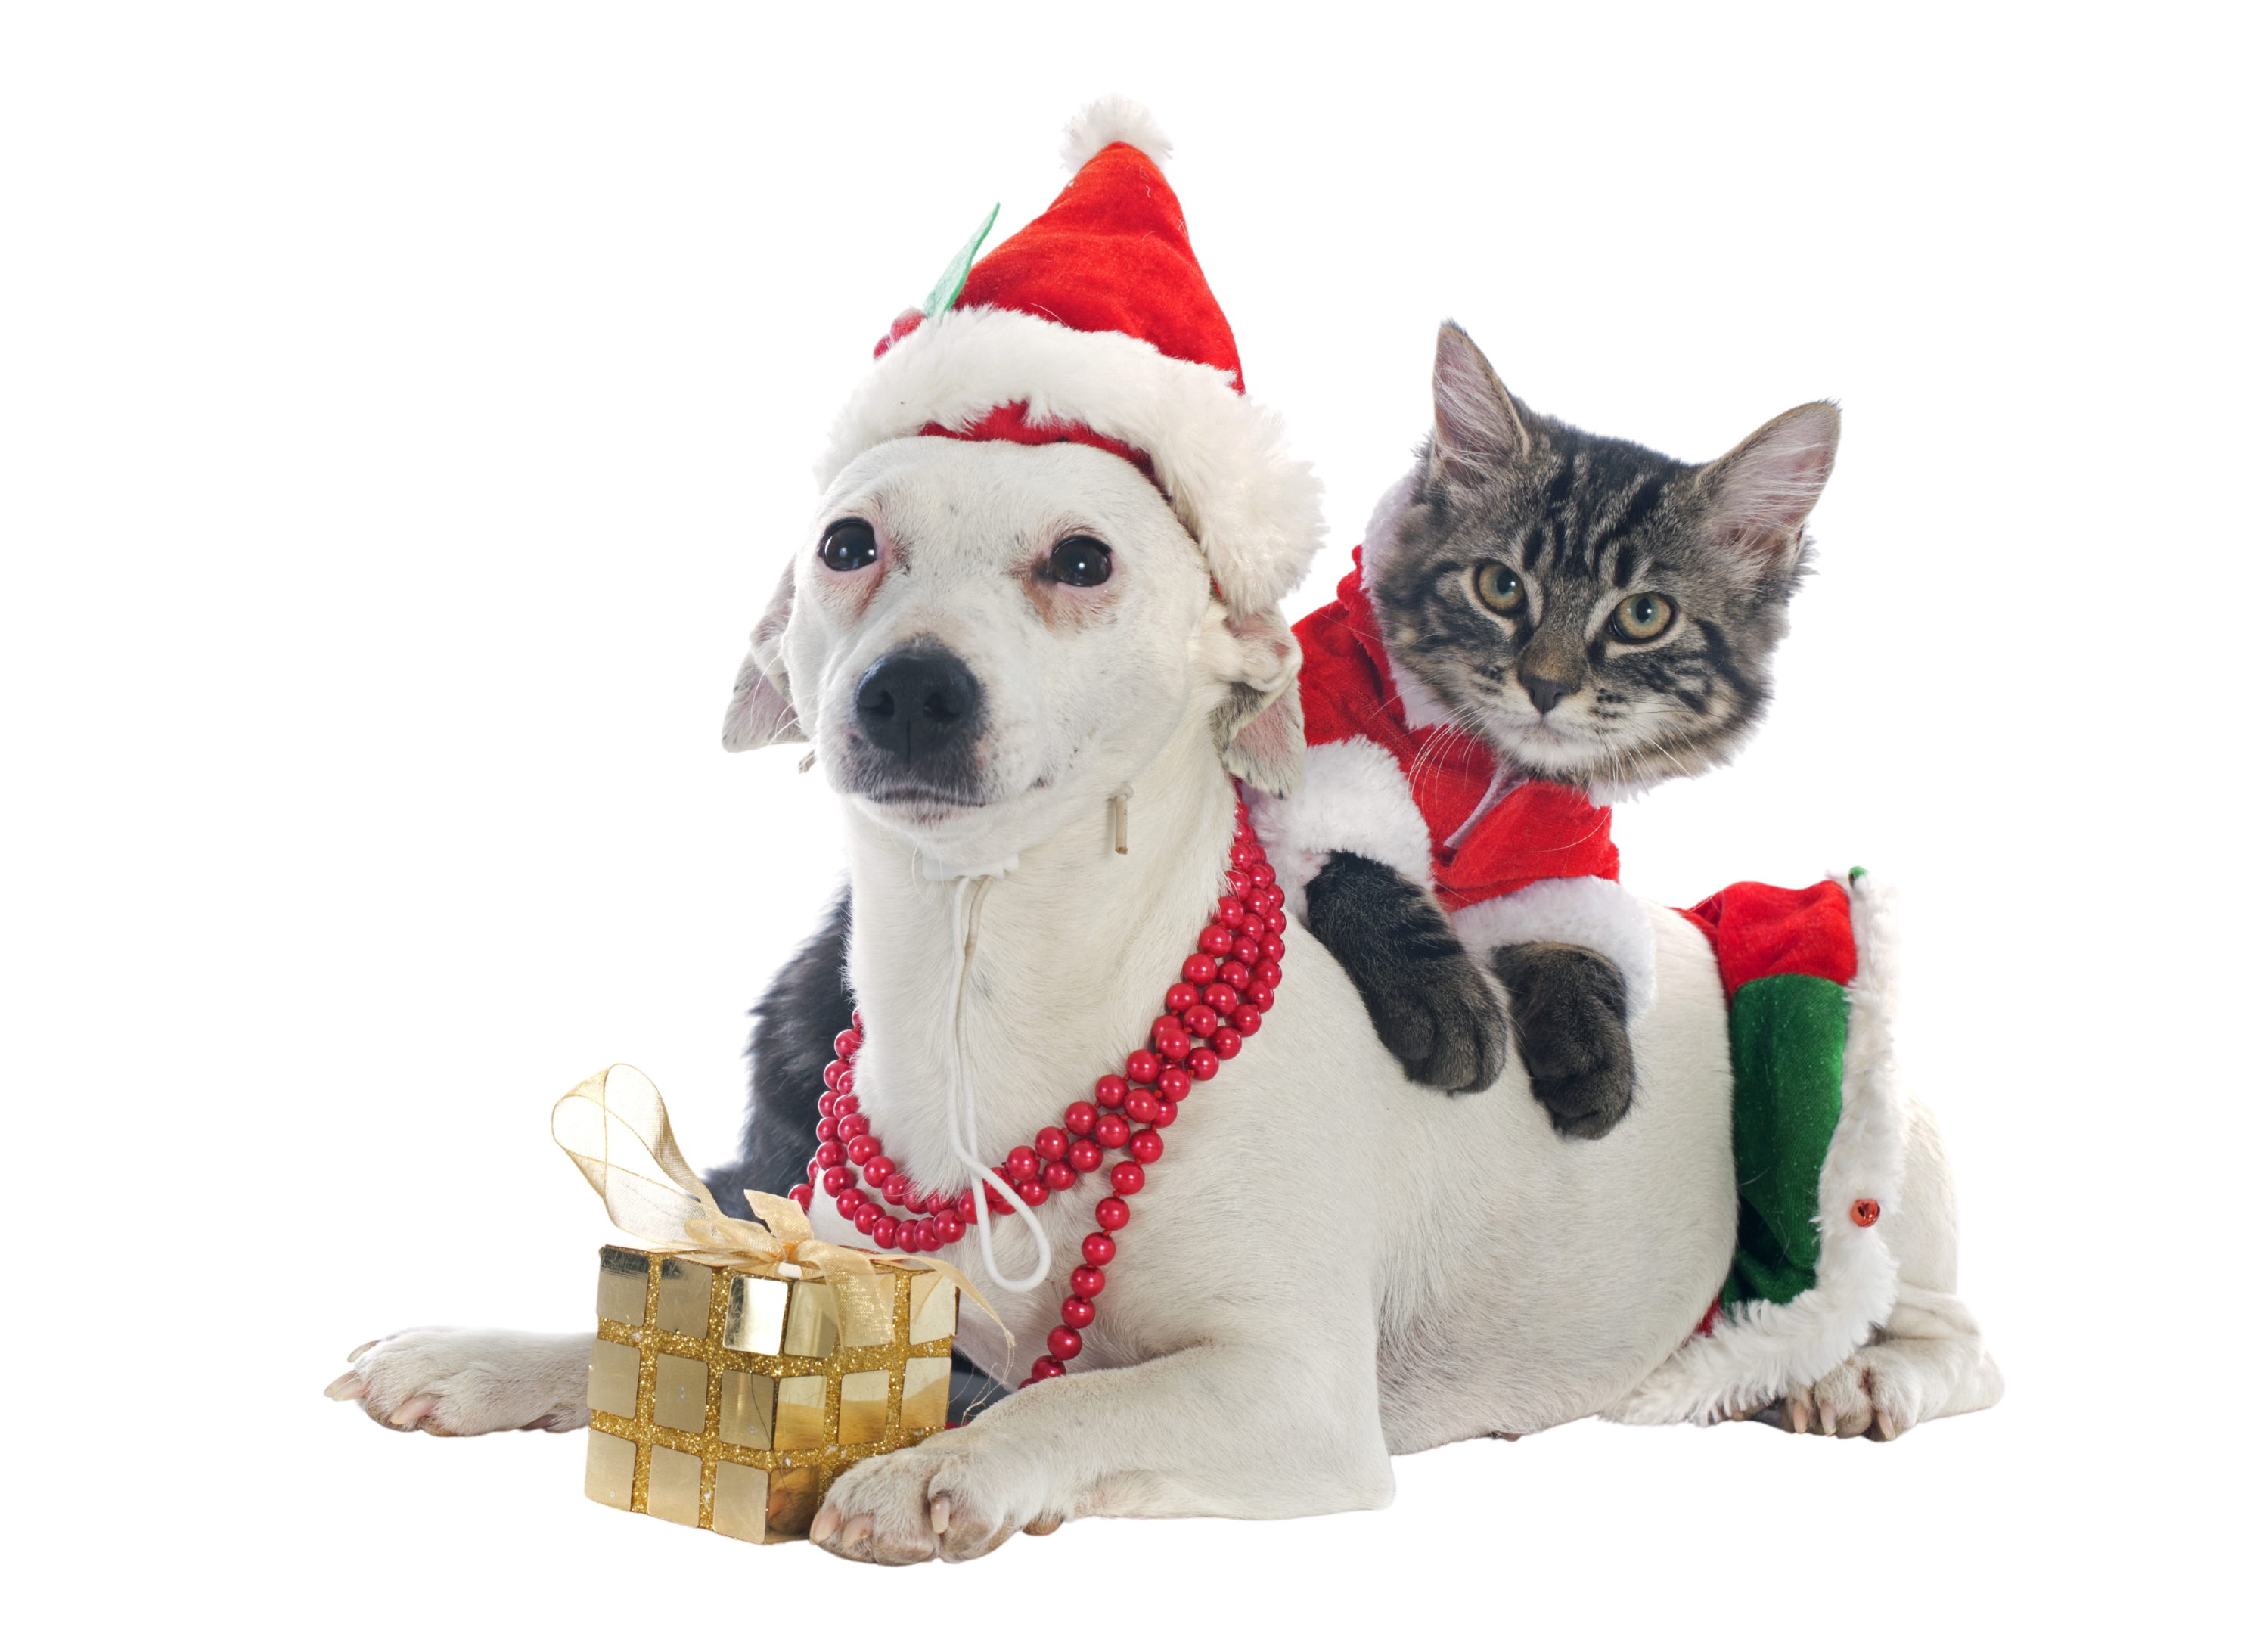 Dog and cat in Christmas outfits